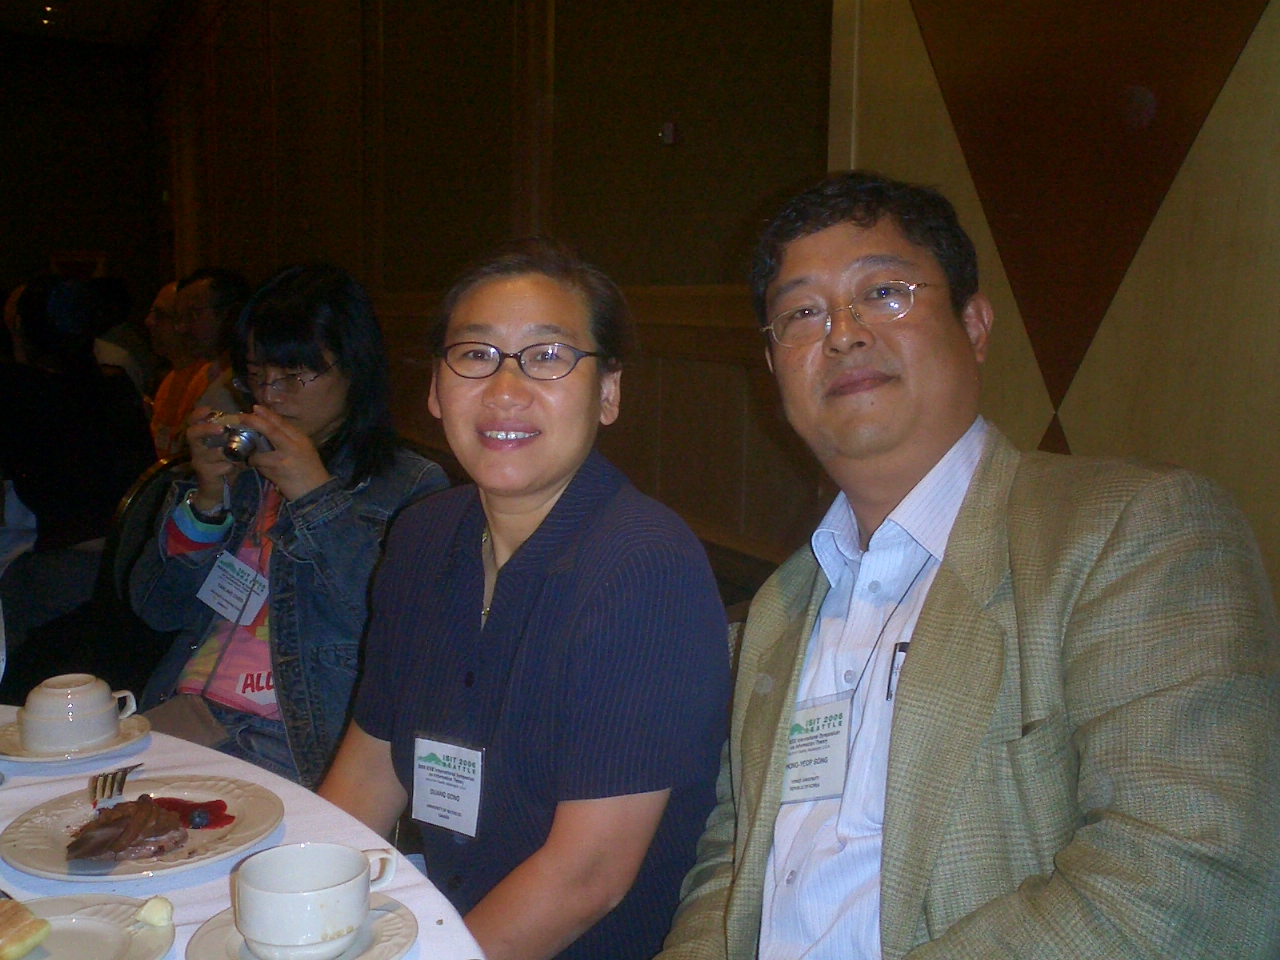 with Professor G. Gong